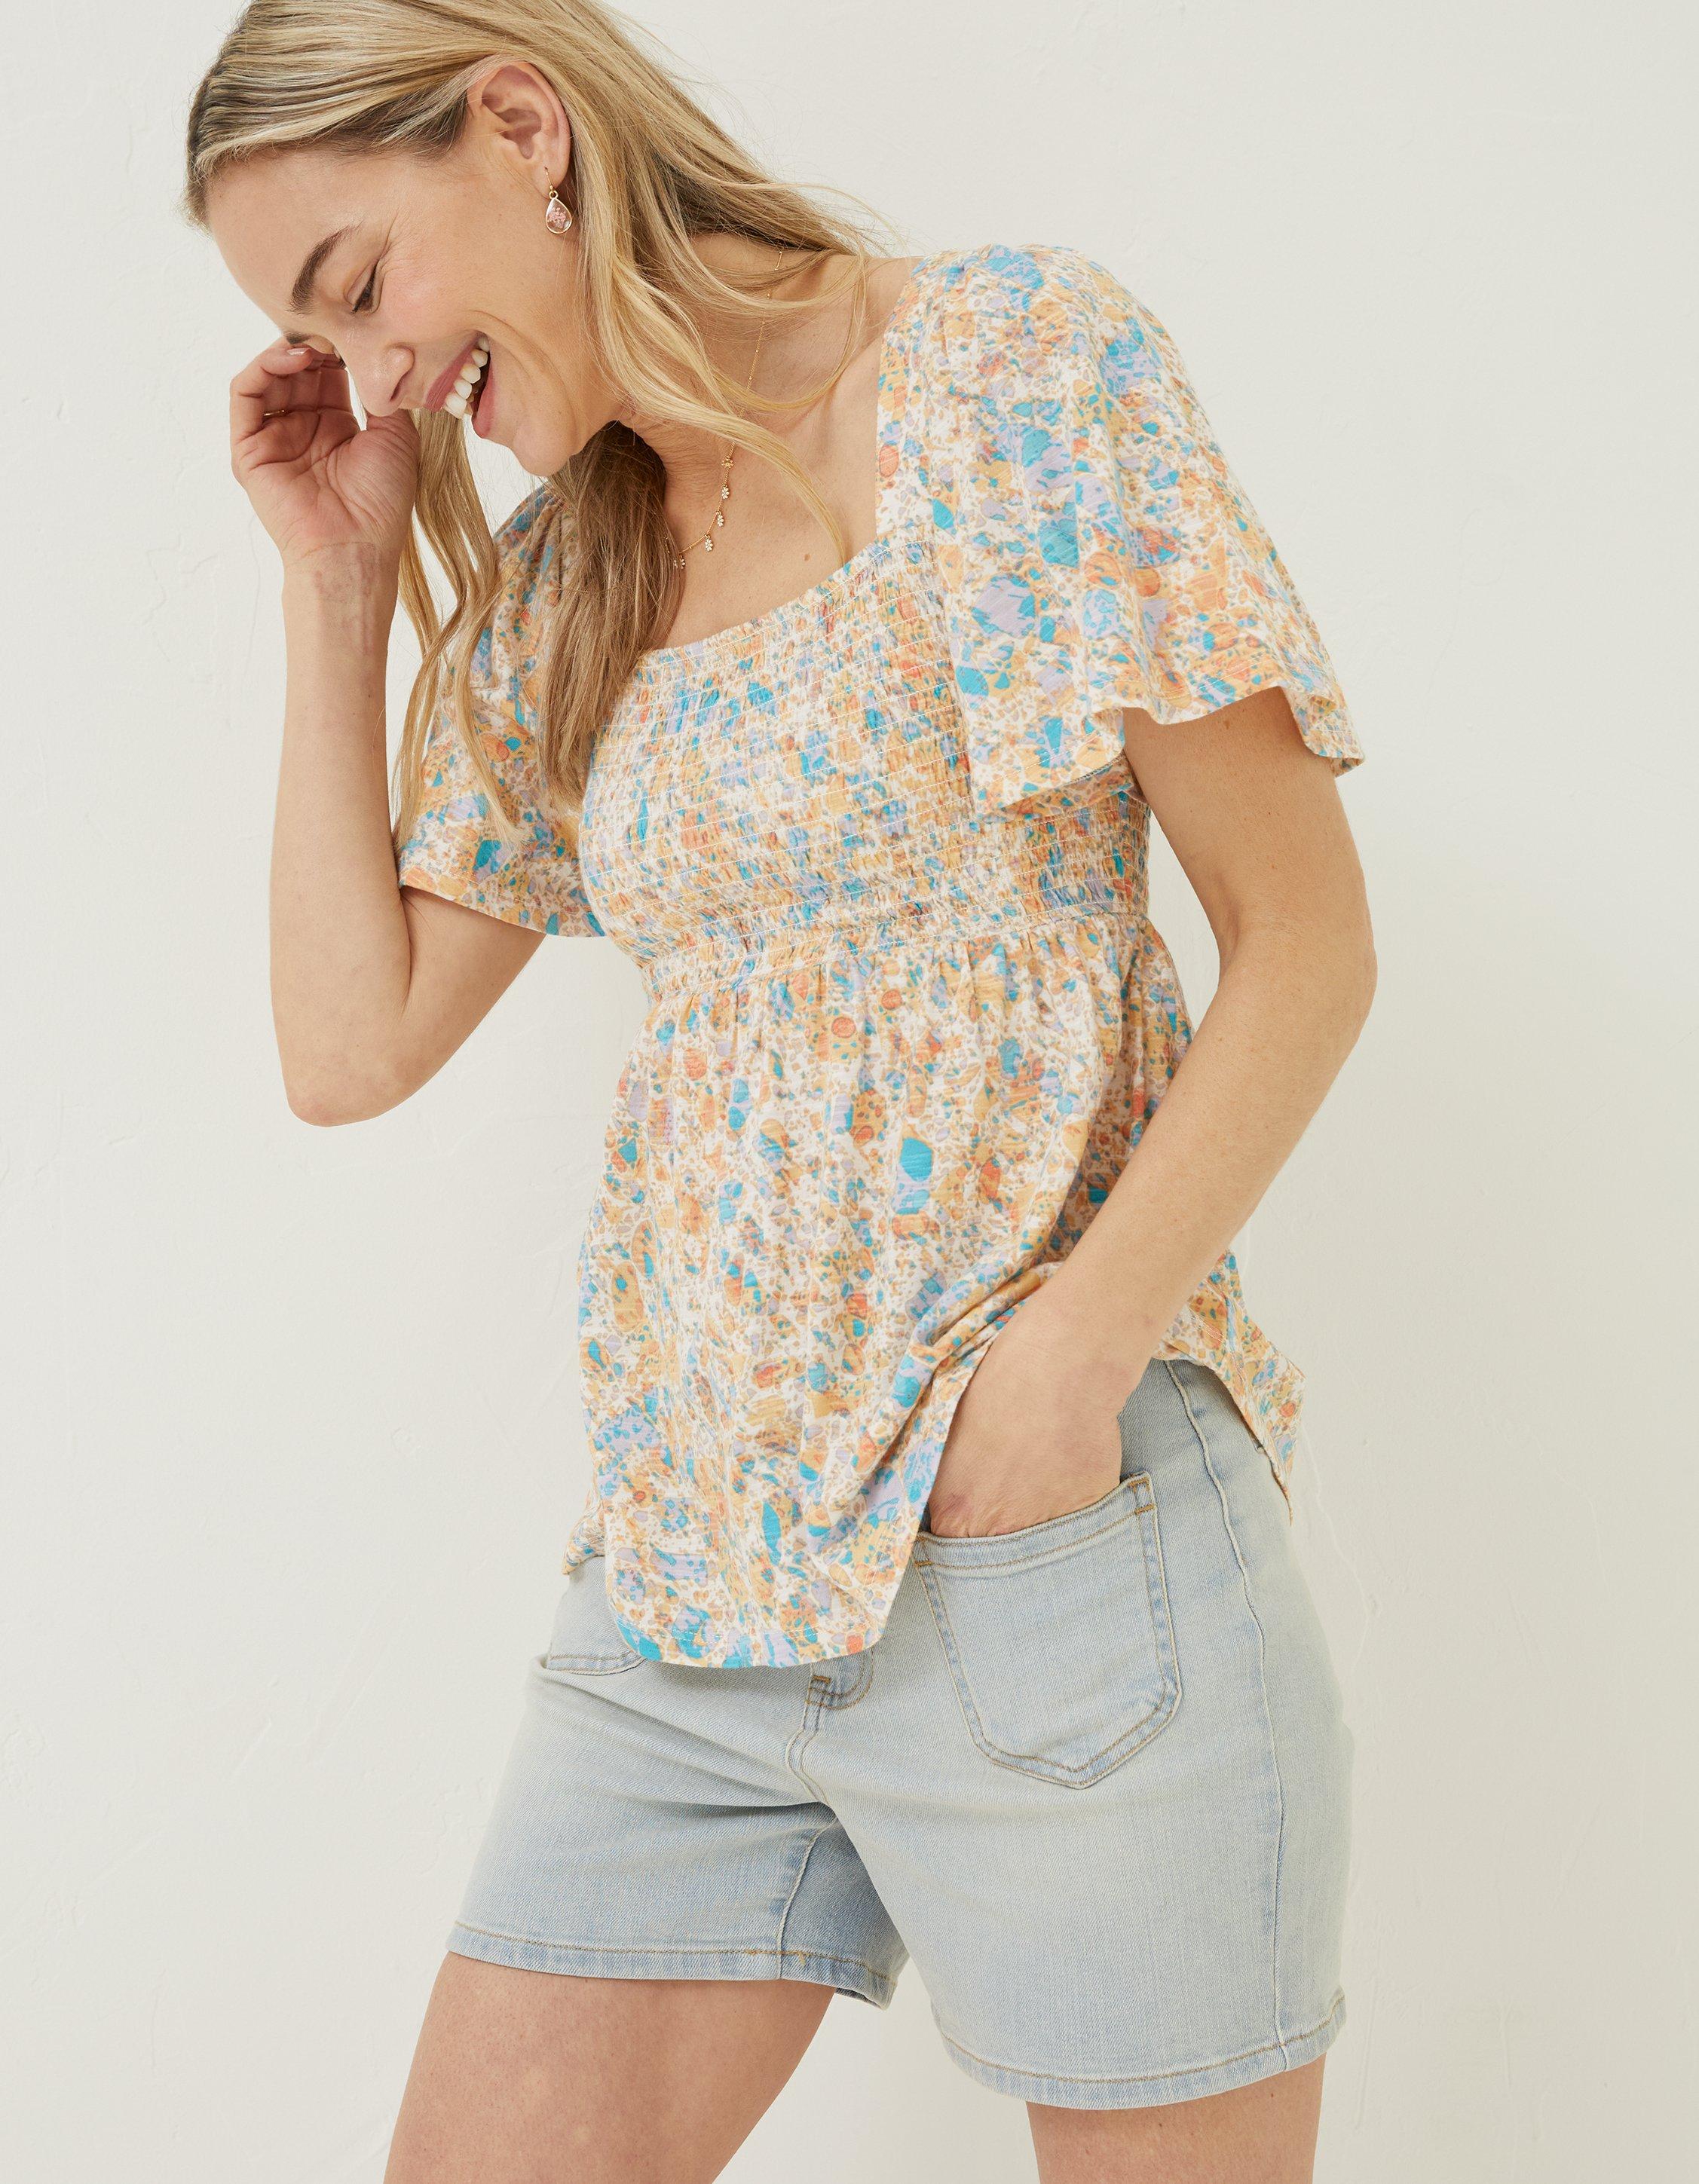 Travelers Classic V-Neck Top - Chico's